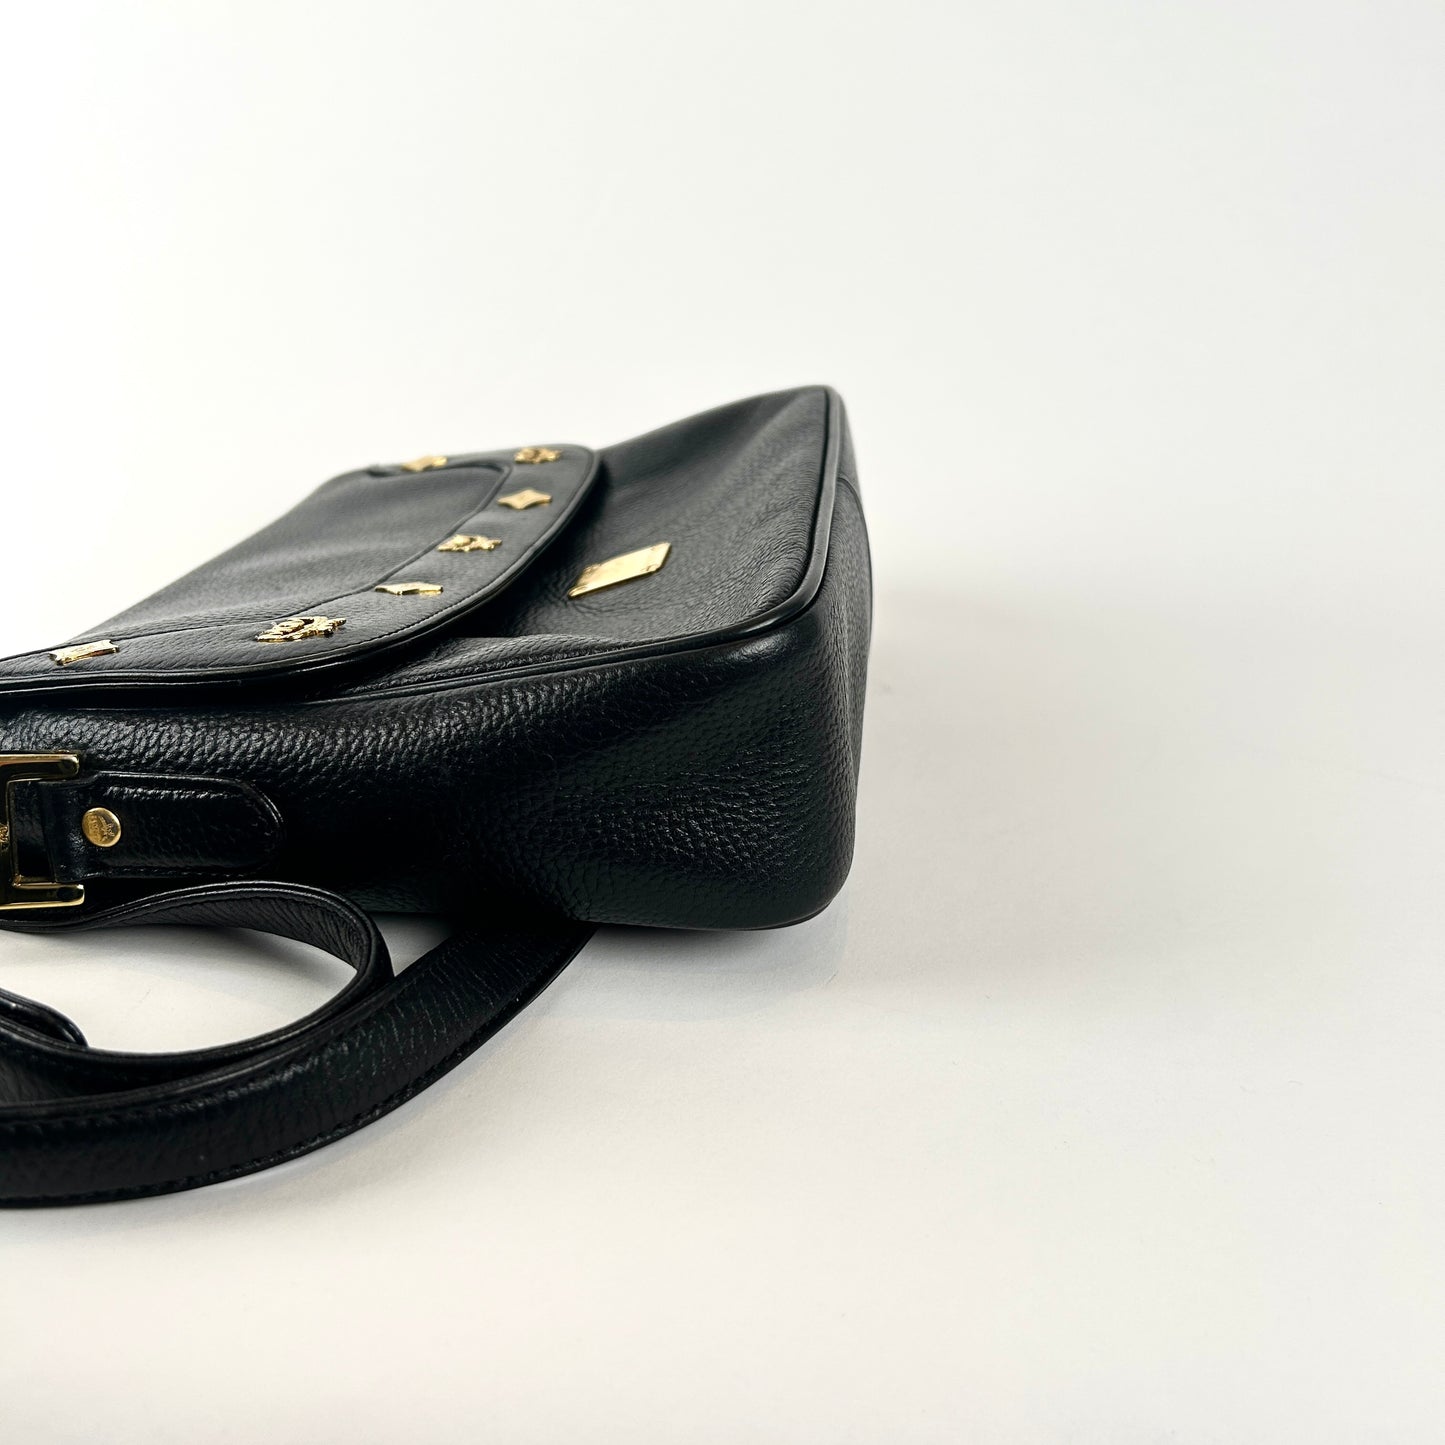 Leather Crossbody Bag in Black Leather